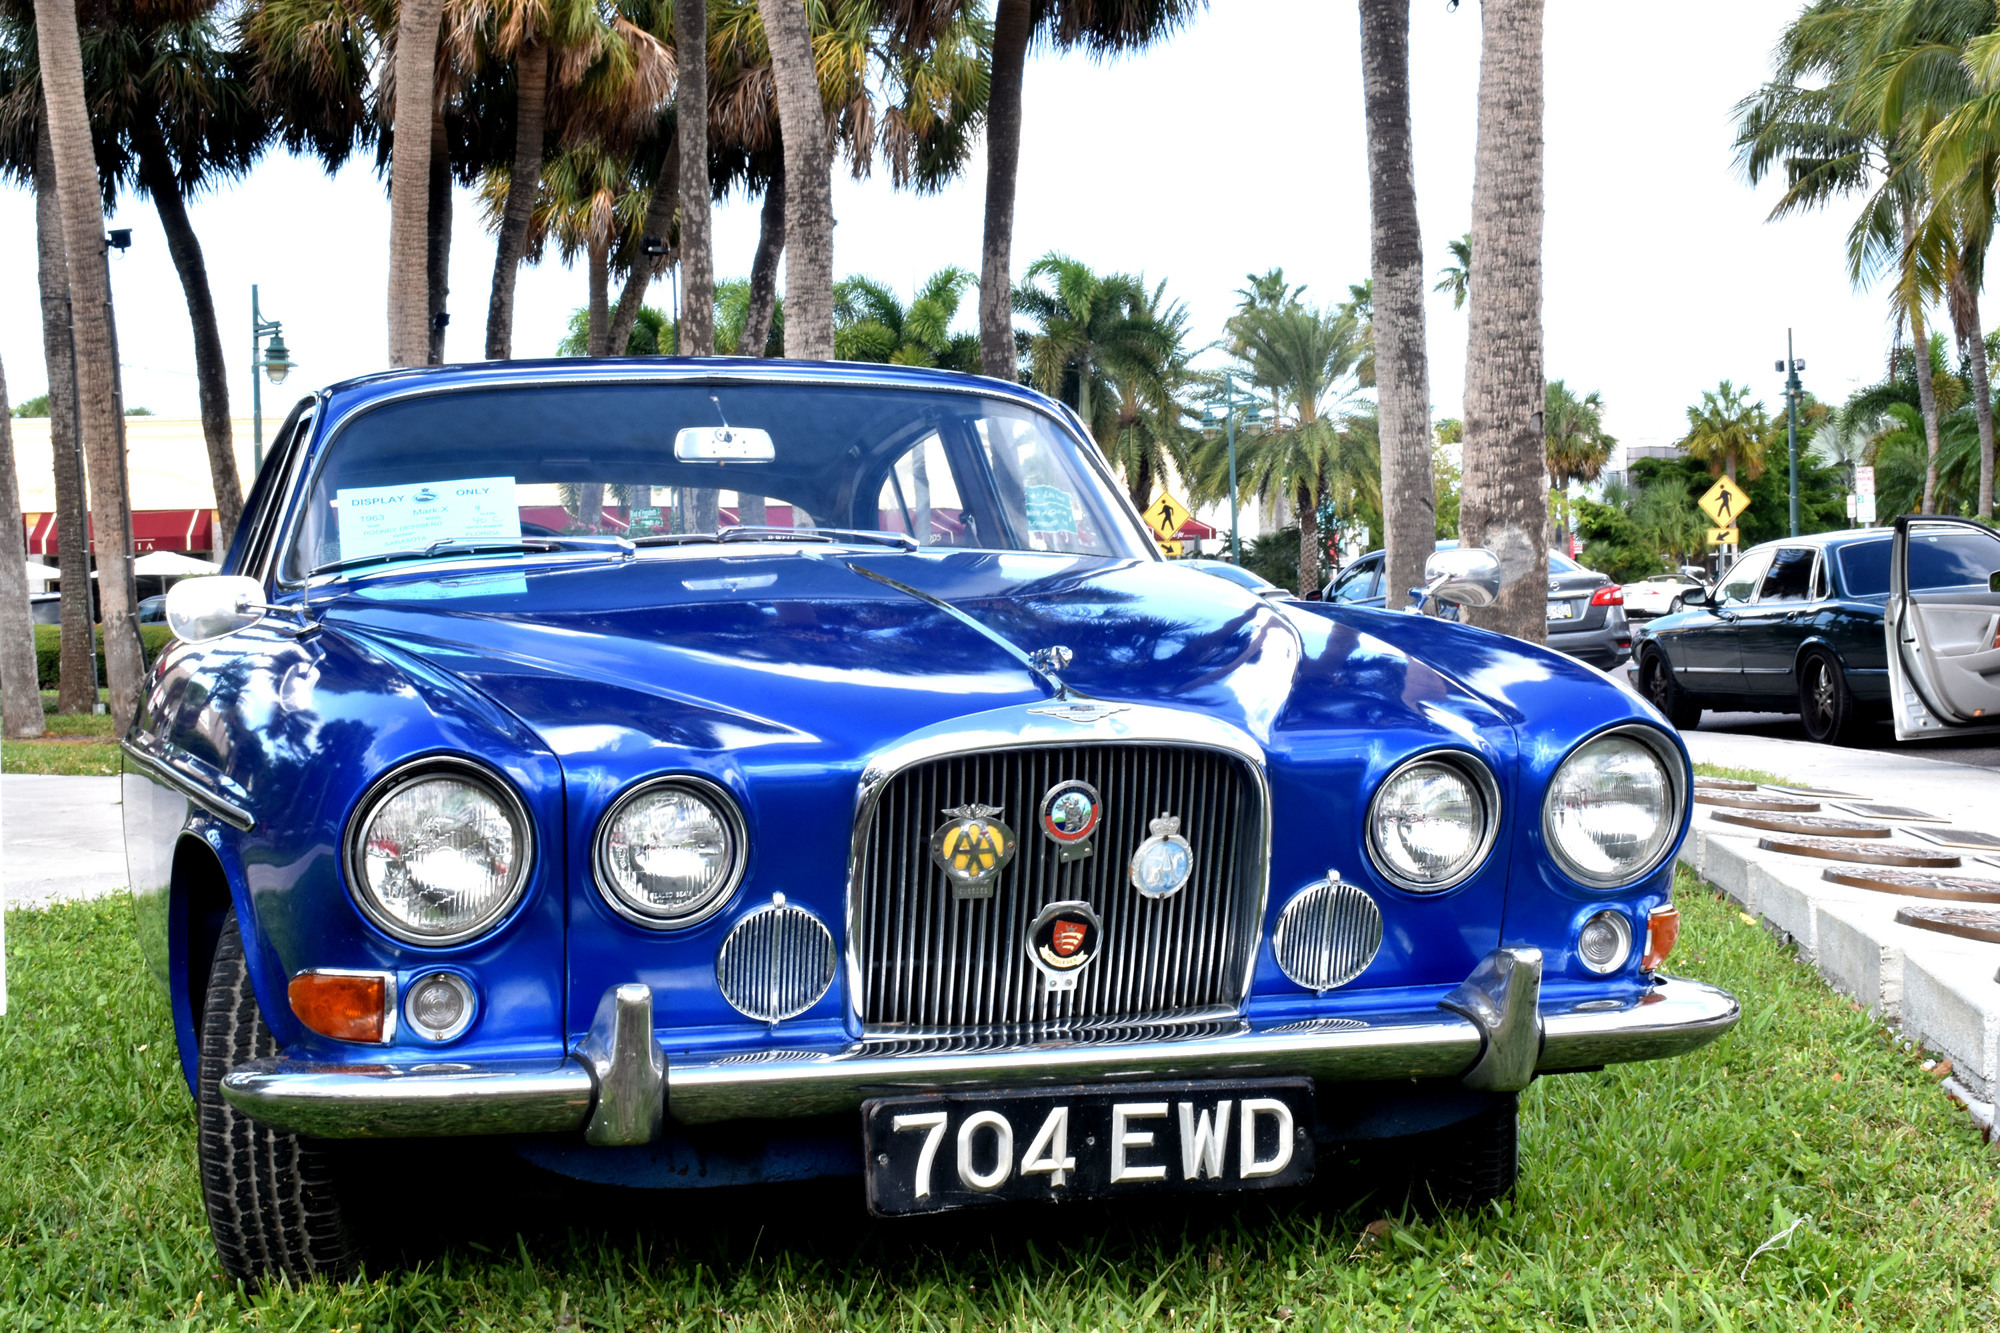 The 33rd annual Jaguar Concours de Elegance will take place from 10 a.m. to 4 p.m. on Saturday, Oct. 13.